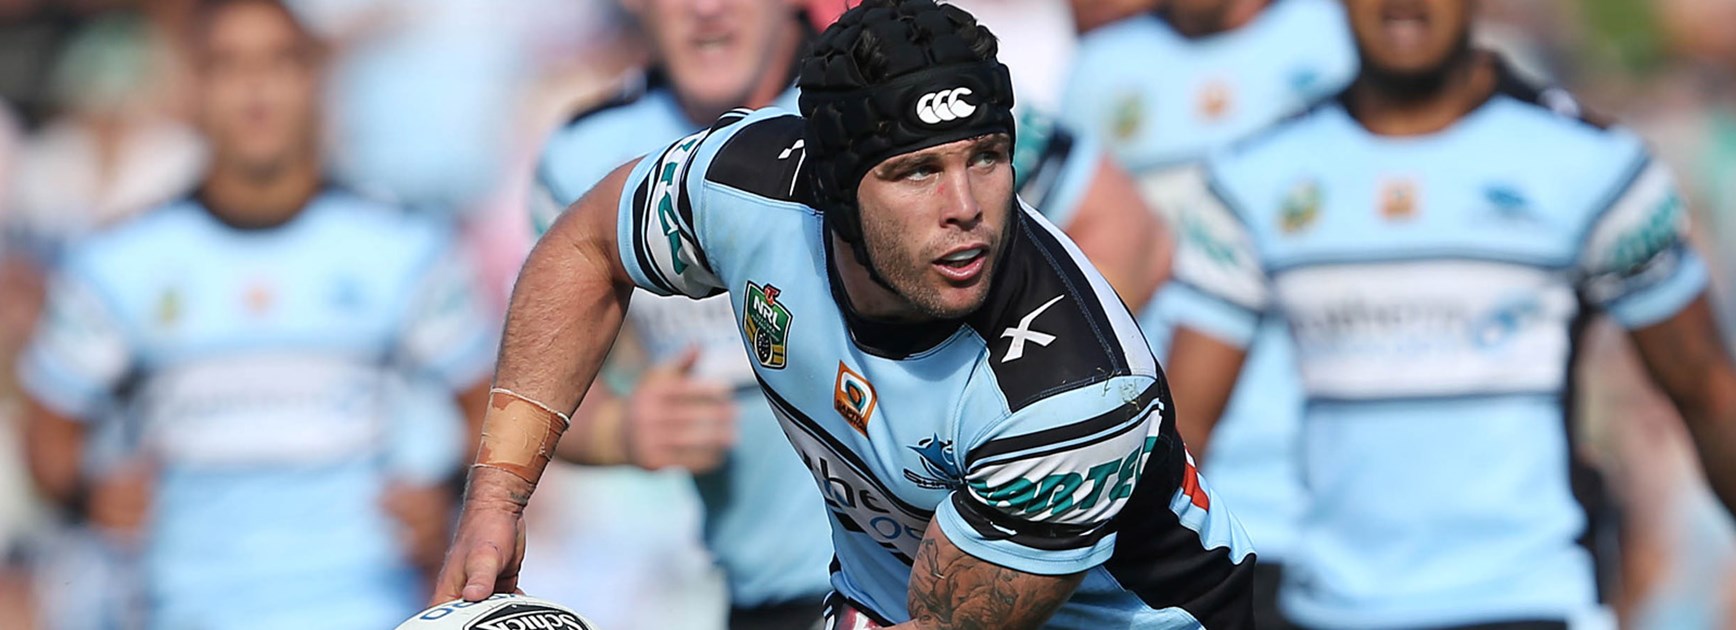 Sharks hooker Michael Ennis performed strongly against the Titans in Round 6.